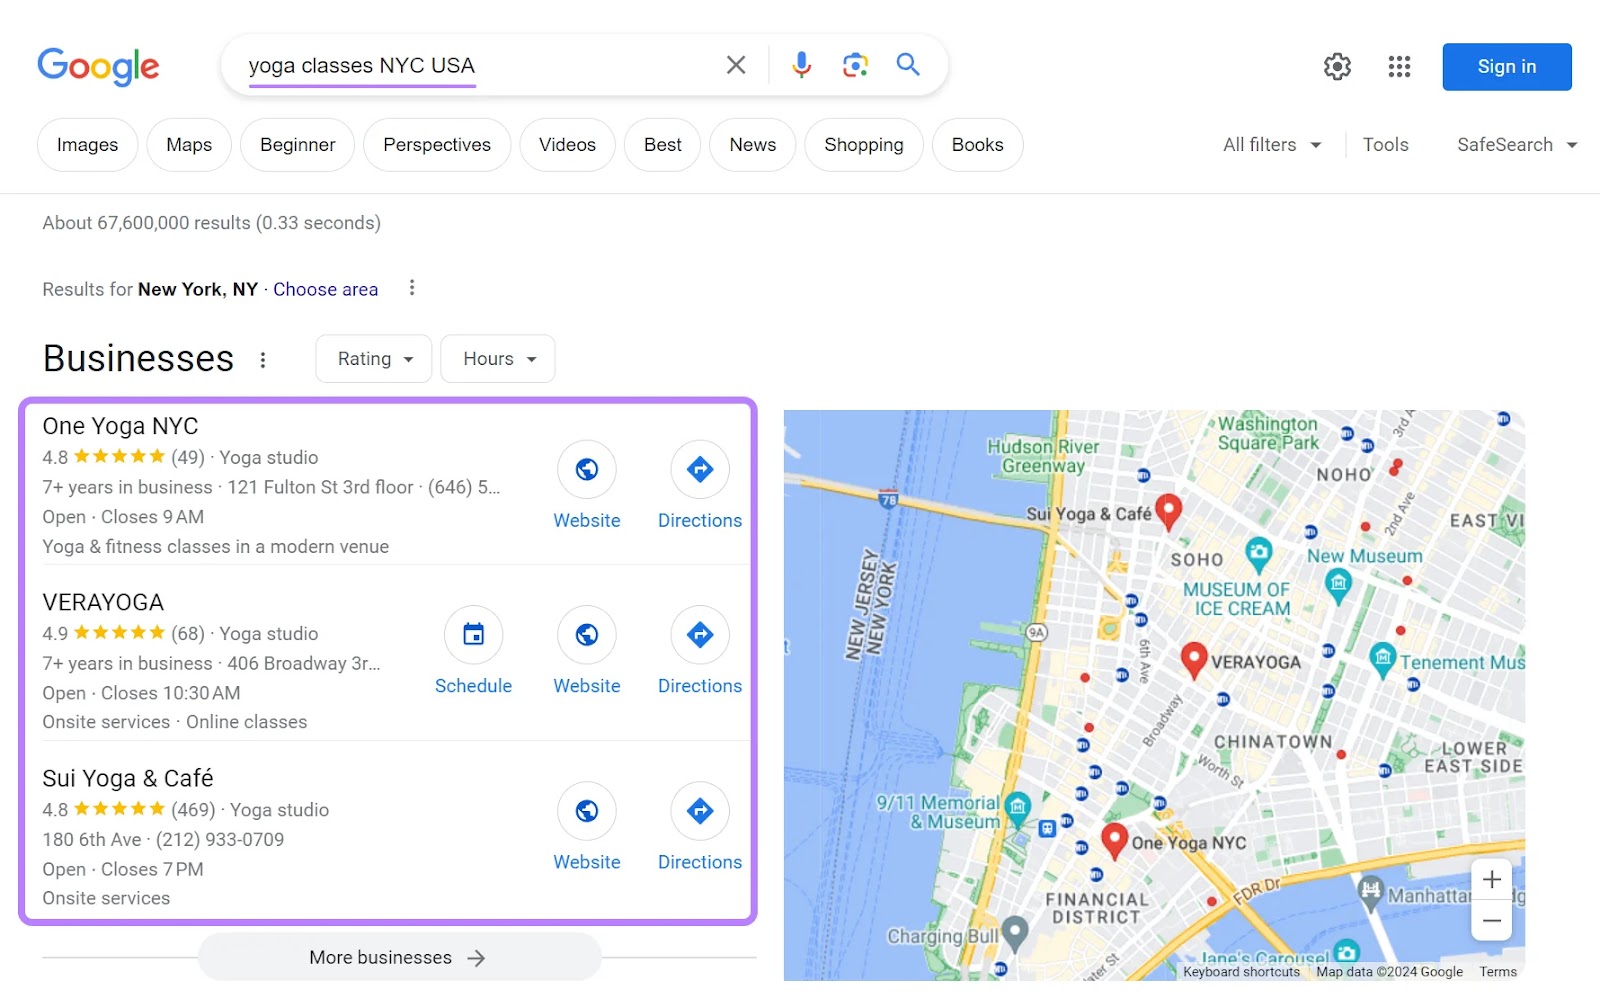 Google local pack results for “yoga classes NYC USA” query